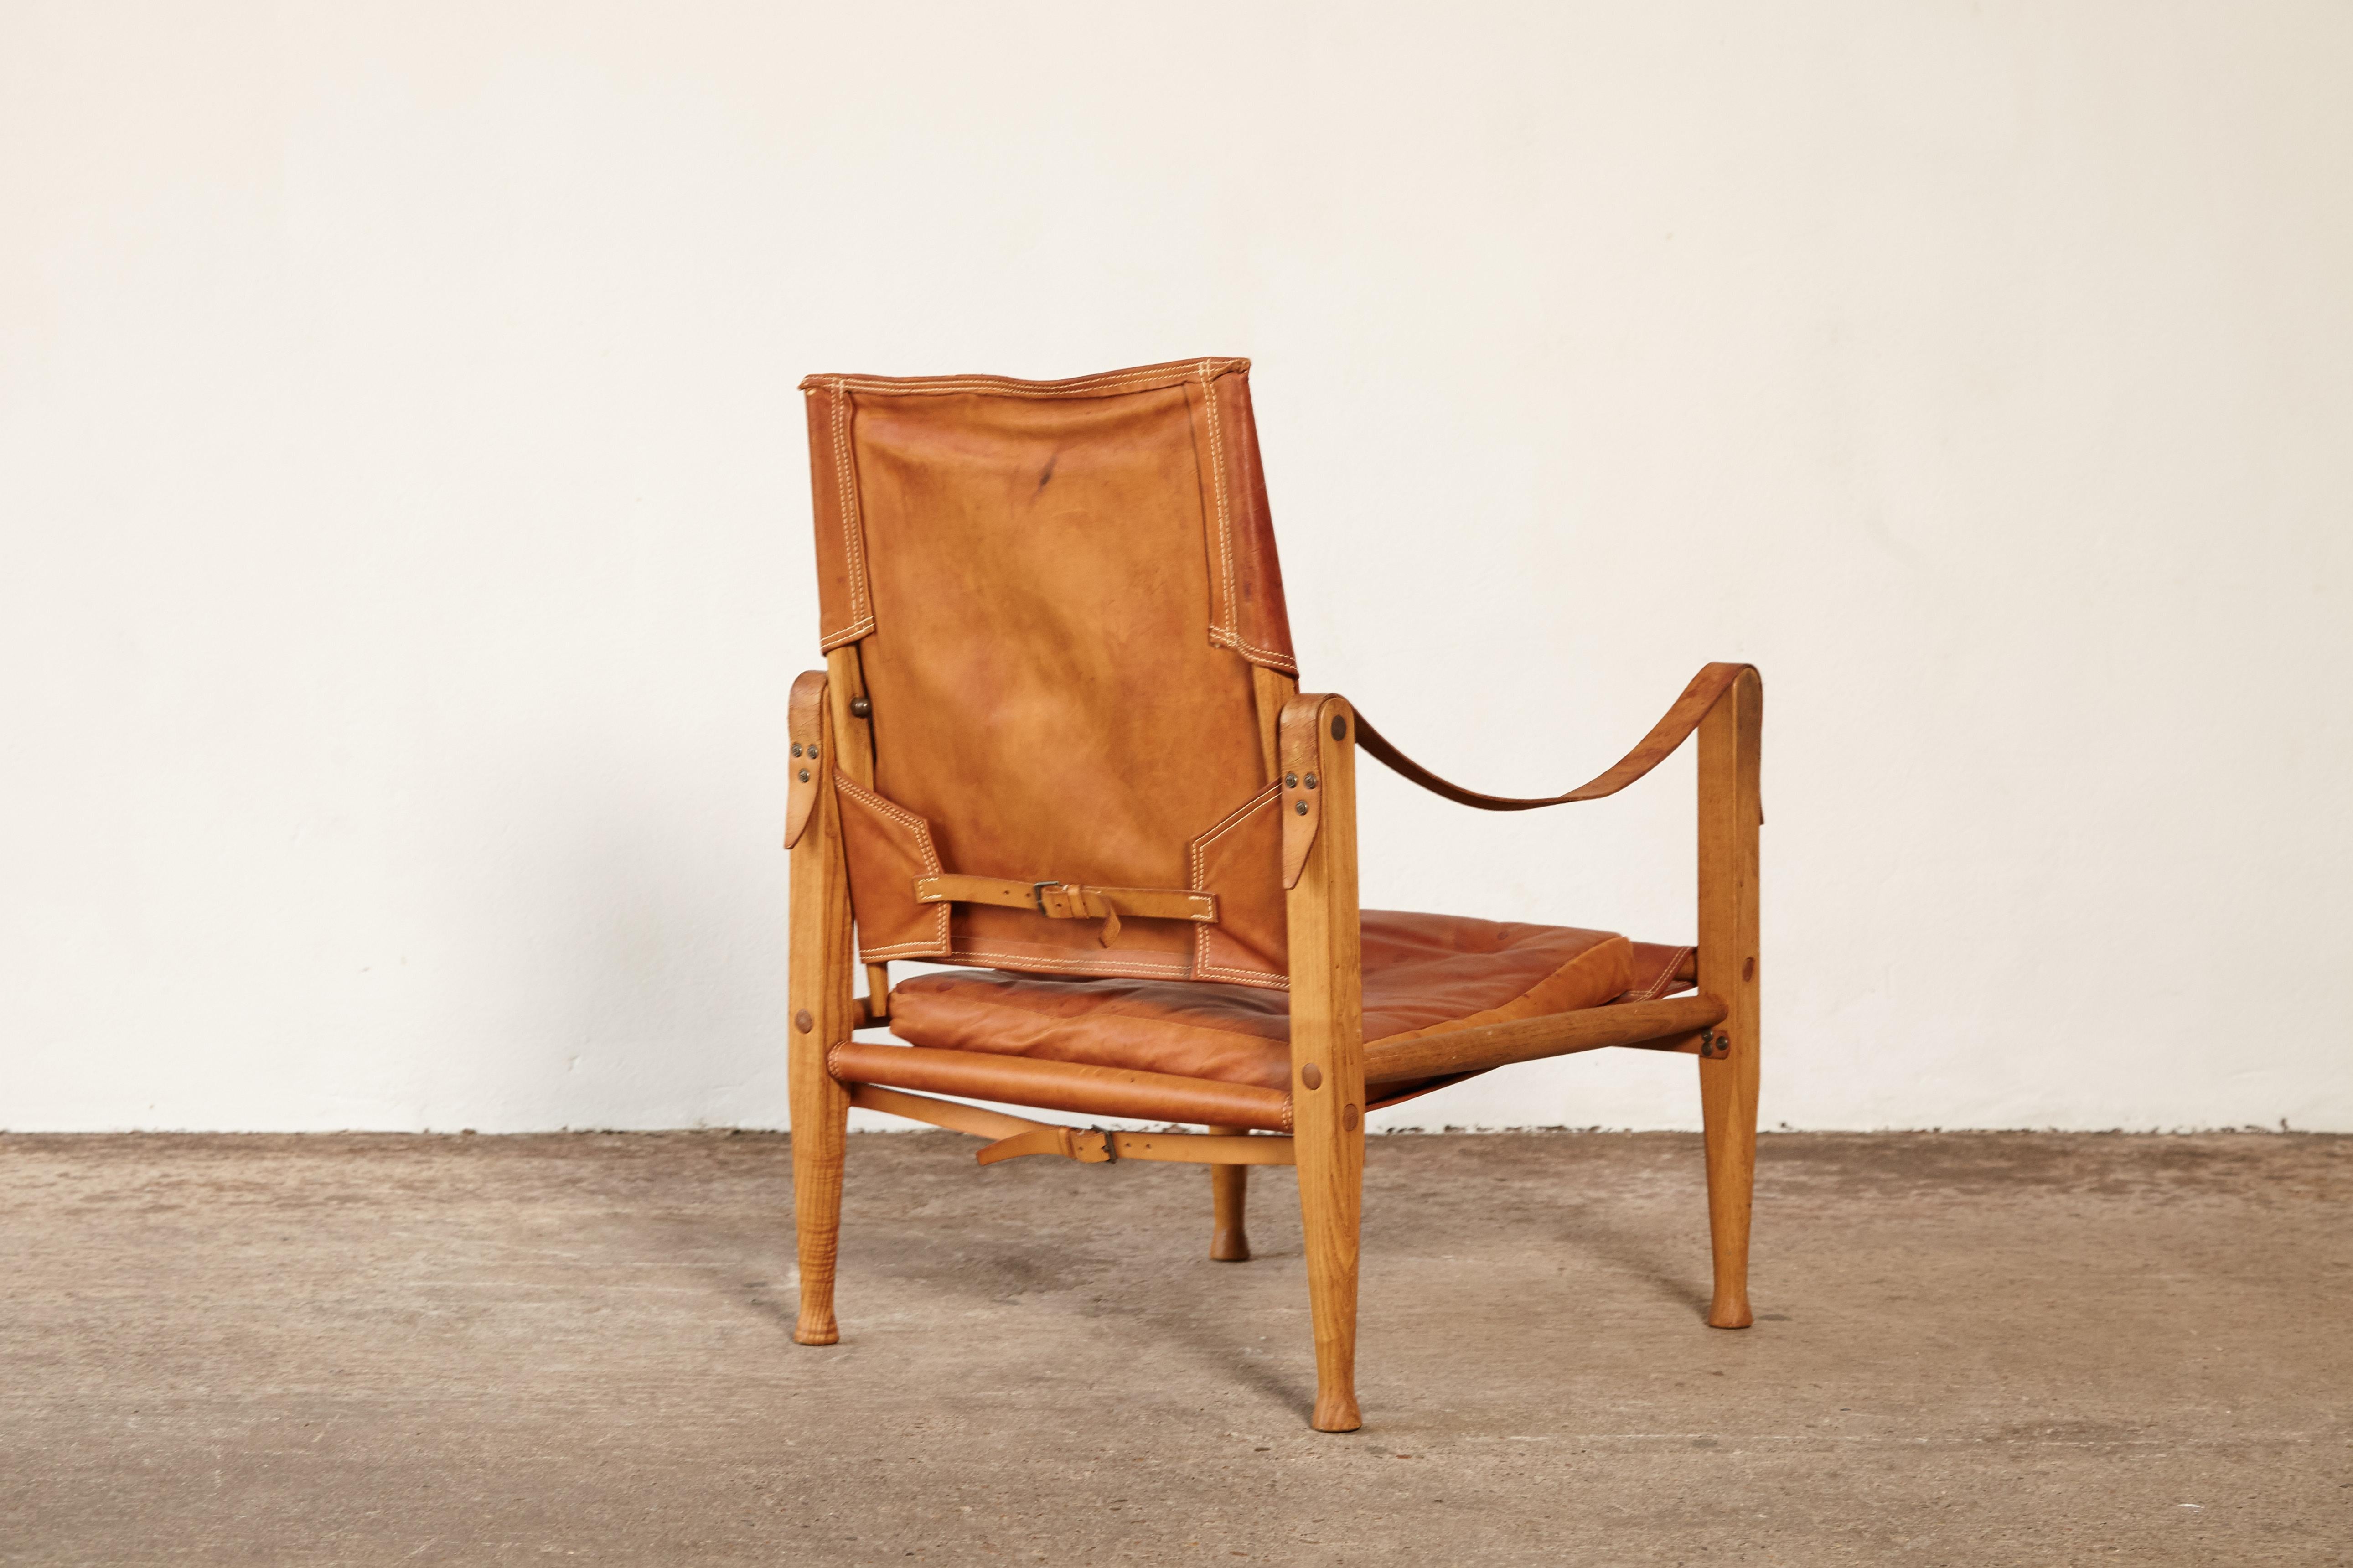 An authentic vintage Kaare Klint safari chairs in beautifully patinated tan leather. Designed in 1933 and produced by Rud Rasmussen, Denmark. In good to fair vintage condition for its age. Marks and patina and wear to the leather as seen.

Fast